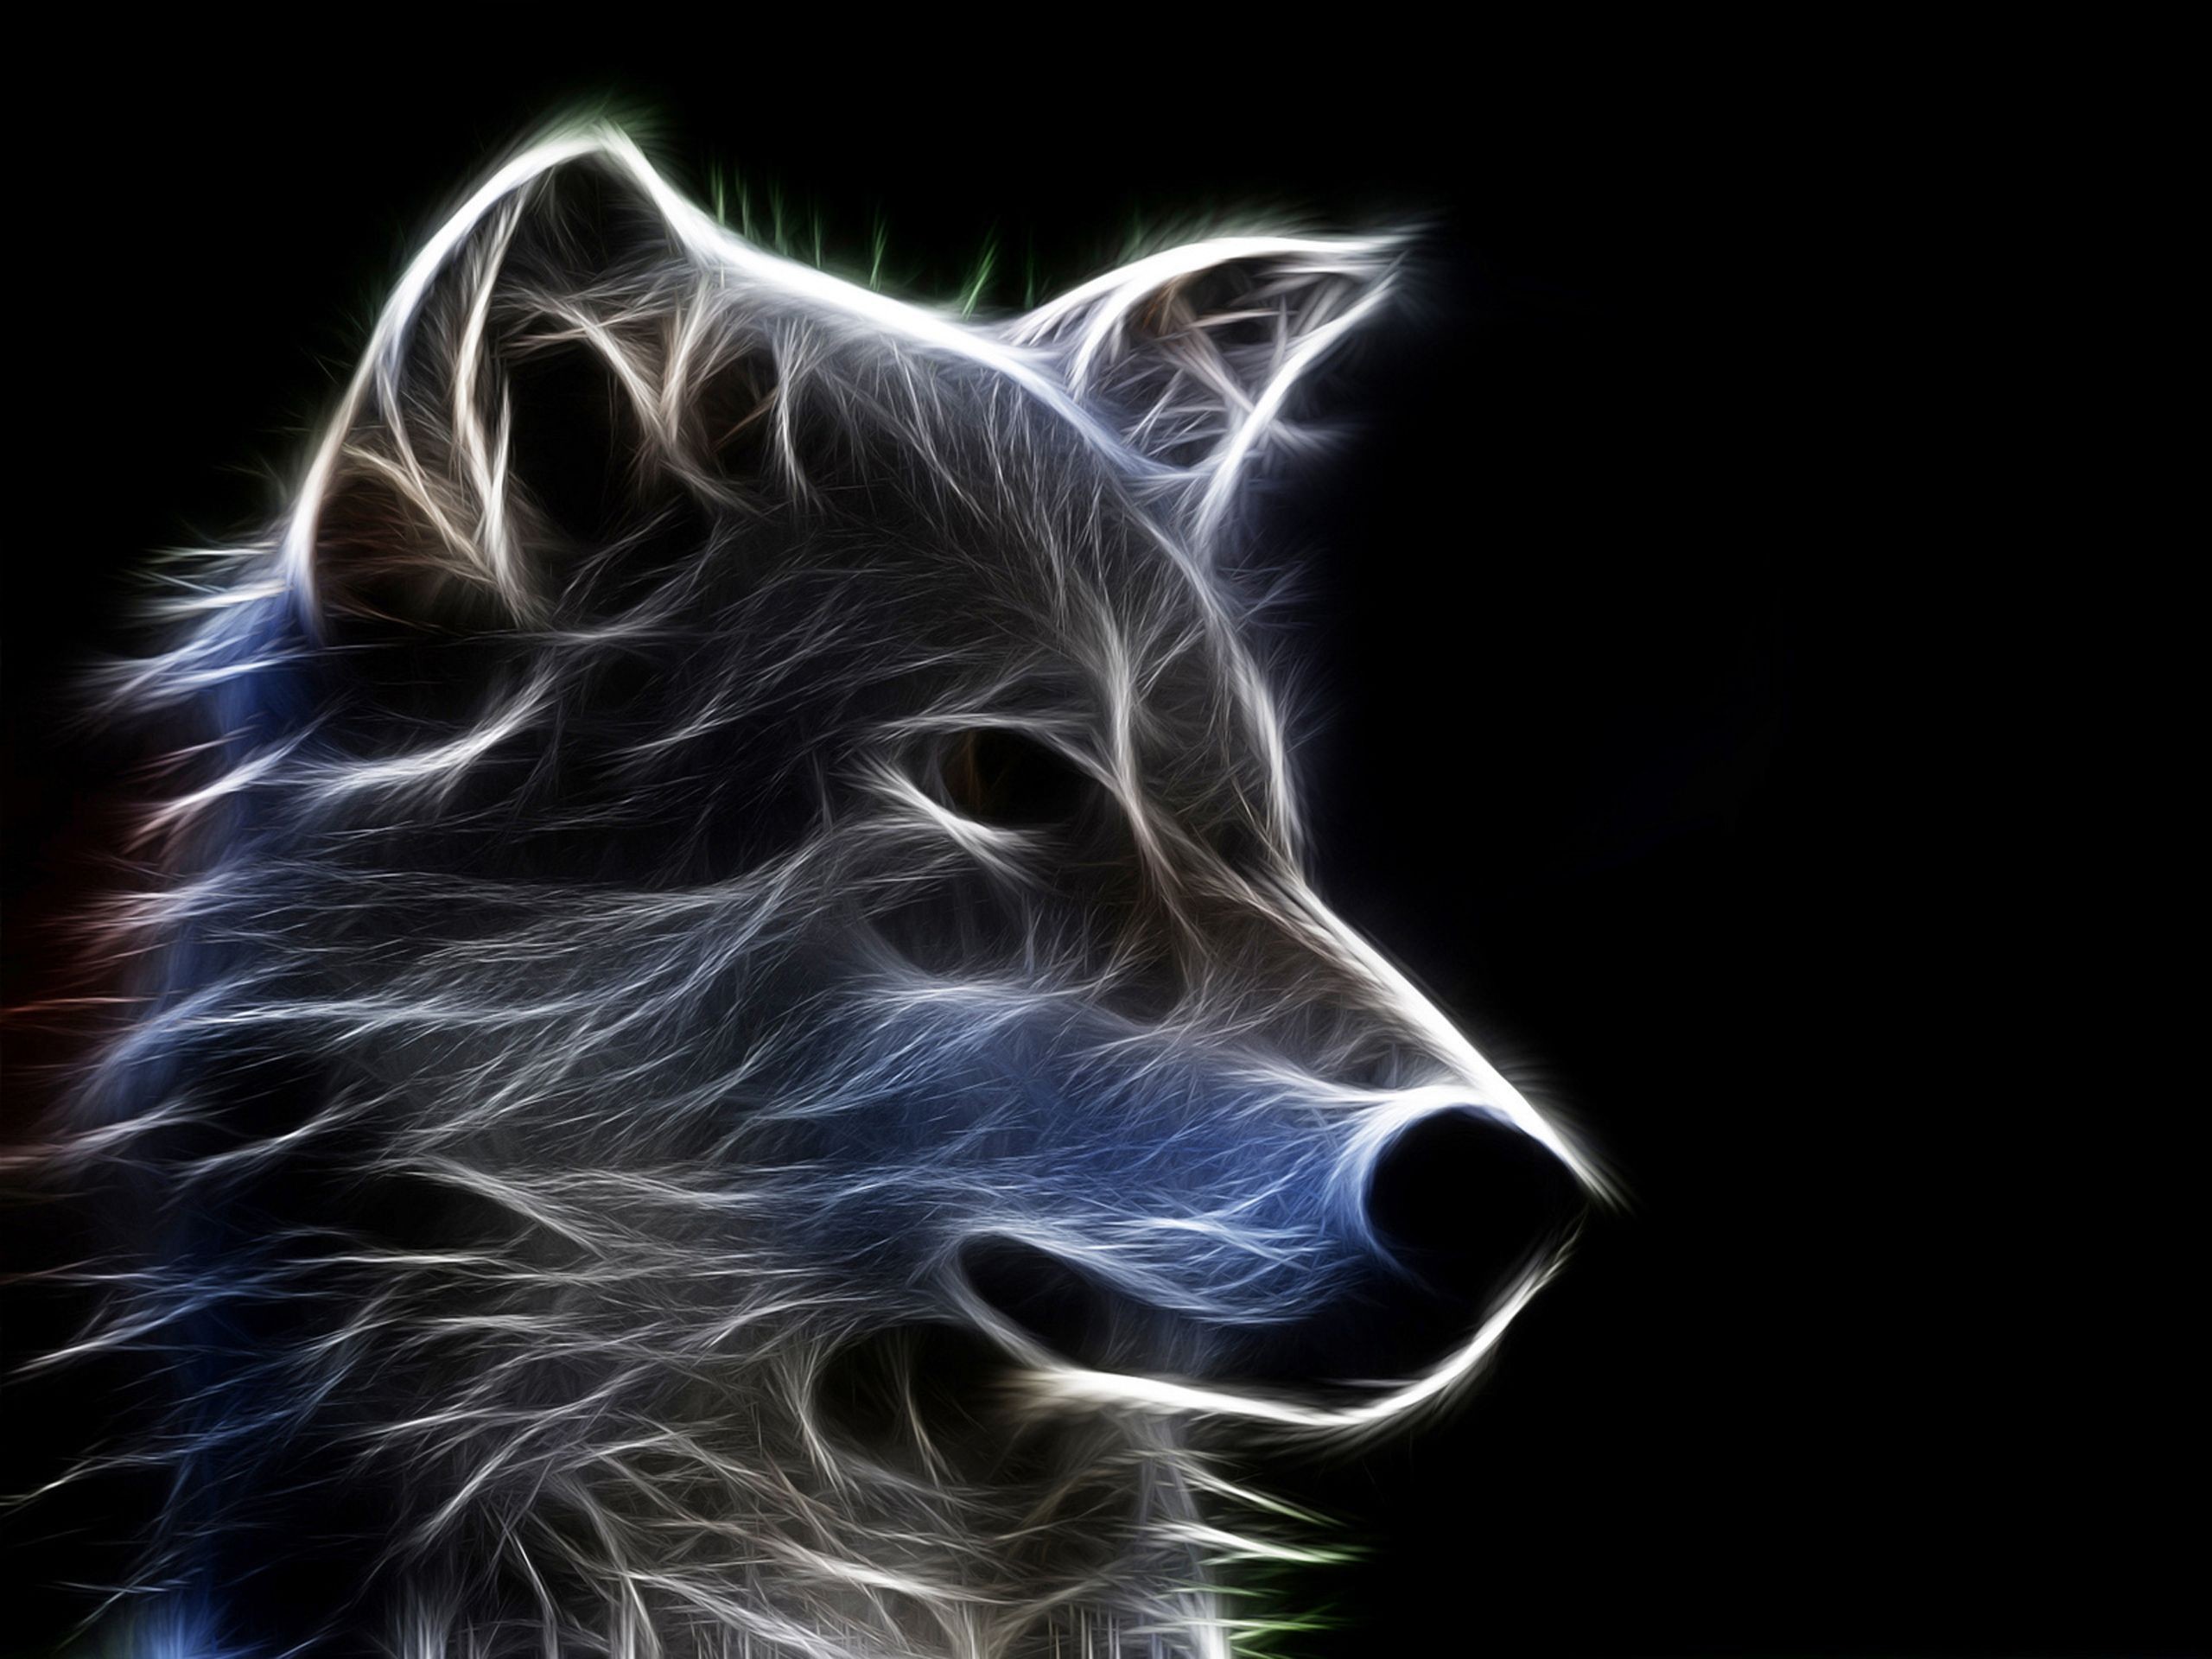 2560x1920 Wolves | Wolves | Pinterest | Animal wallpaper, Wolf and Wolf .